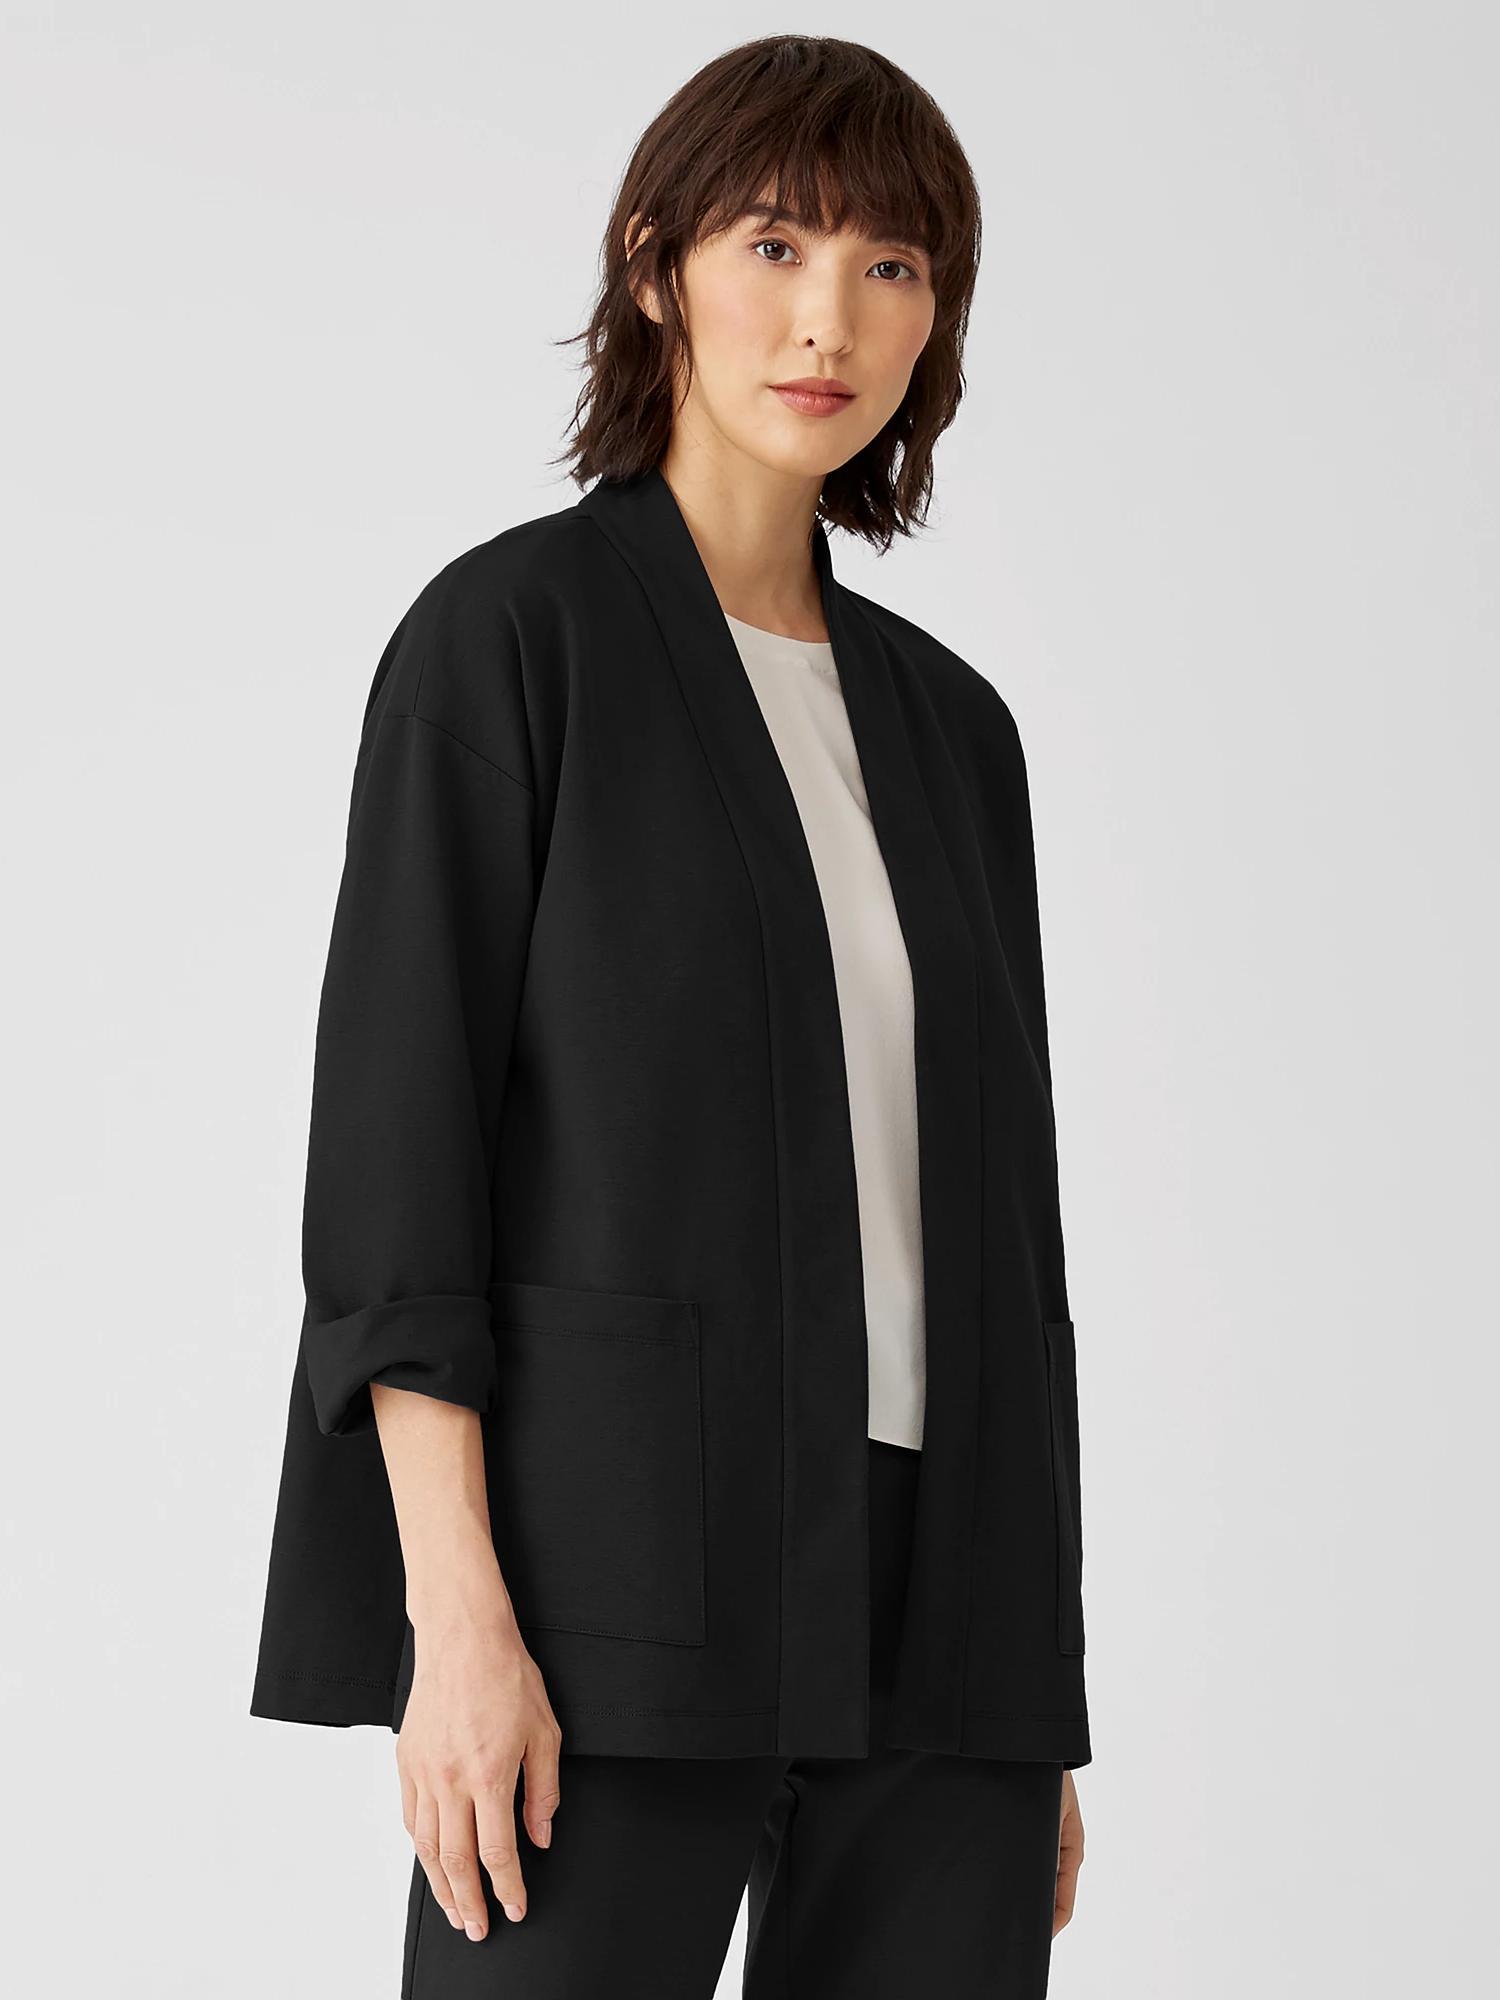 EILEEN FISHER Cotton Ponte Jacketfemale Product Image